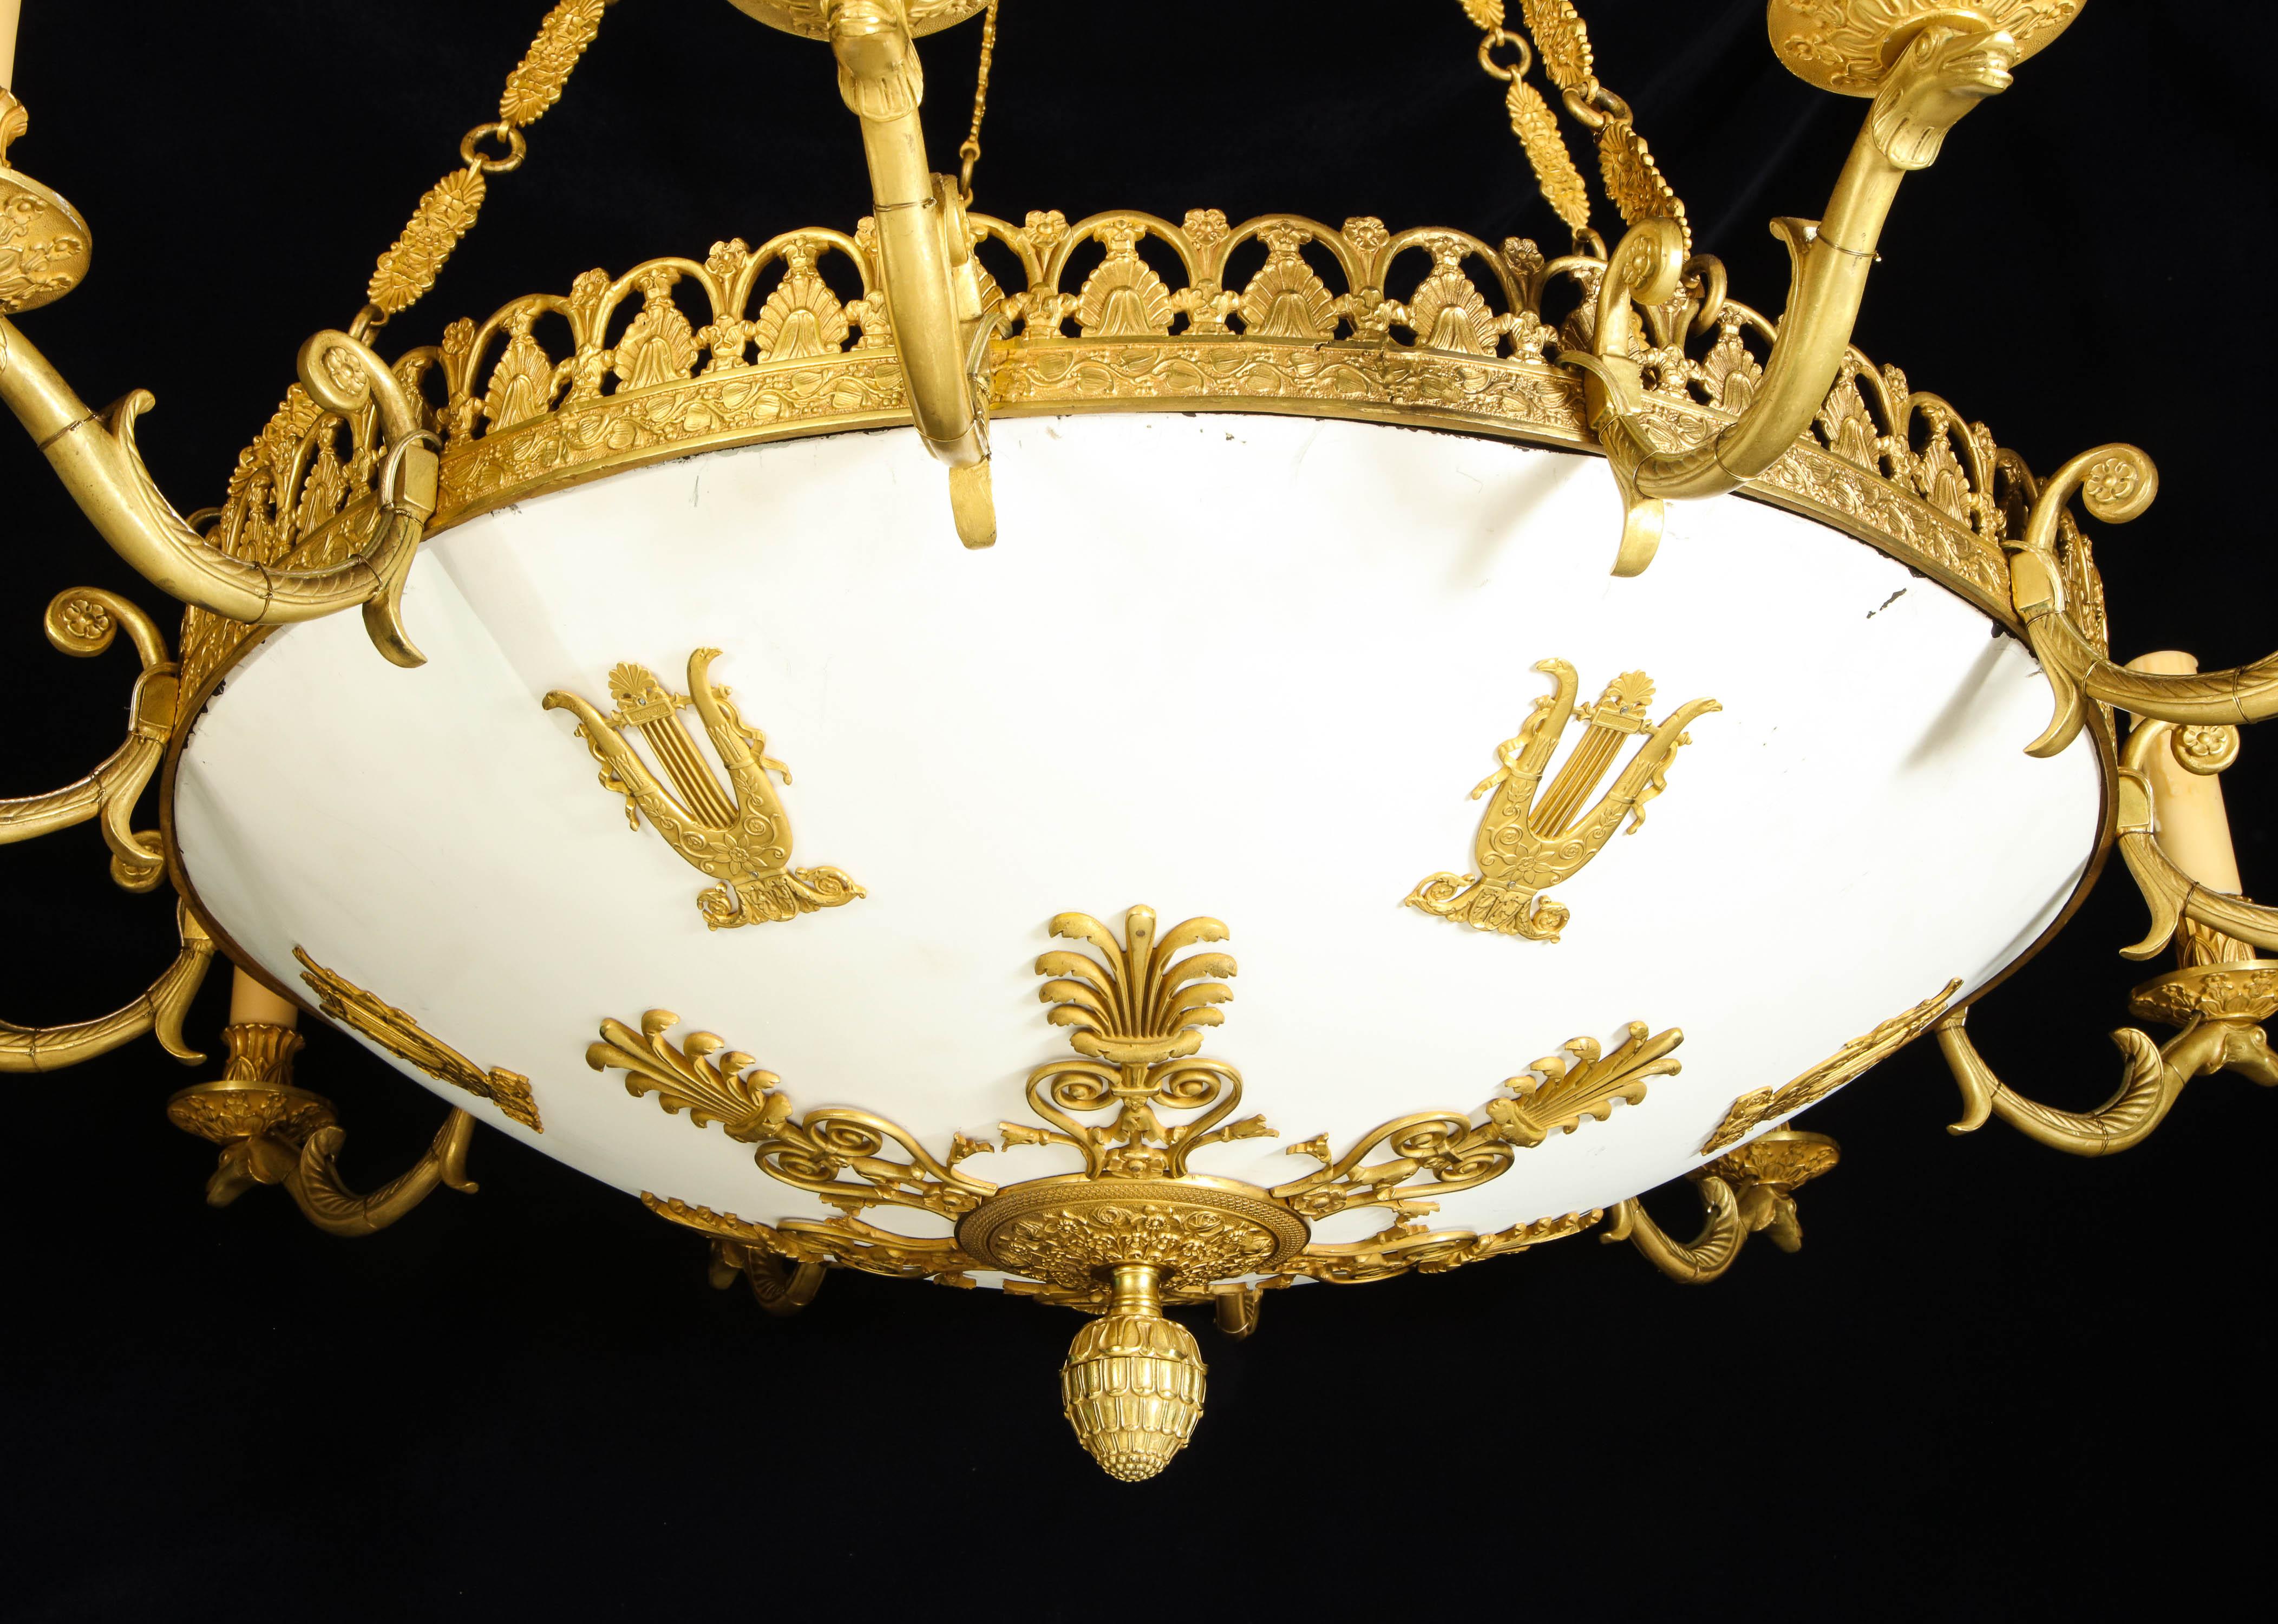 Pair of Large and Important Antique French Empire Gilt Bronze Chandeliers For Sale 8